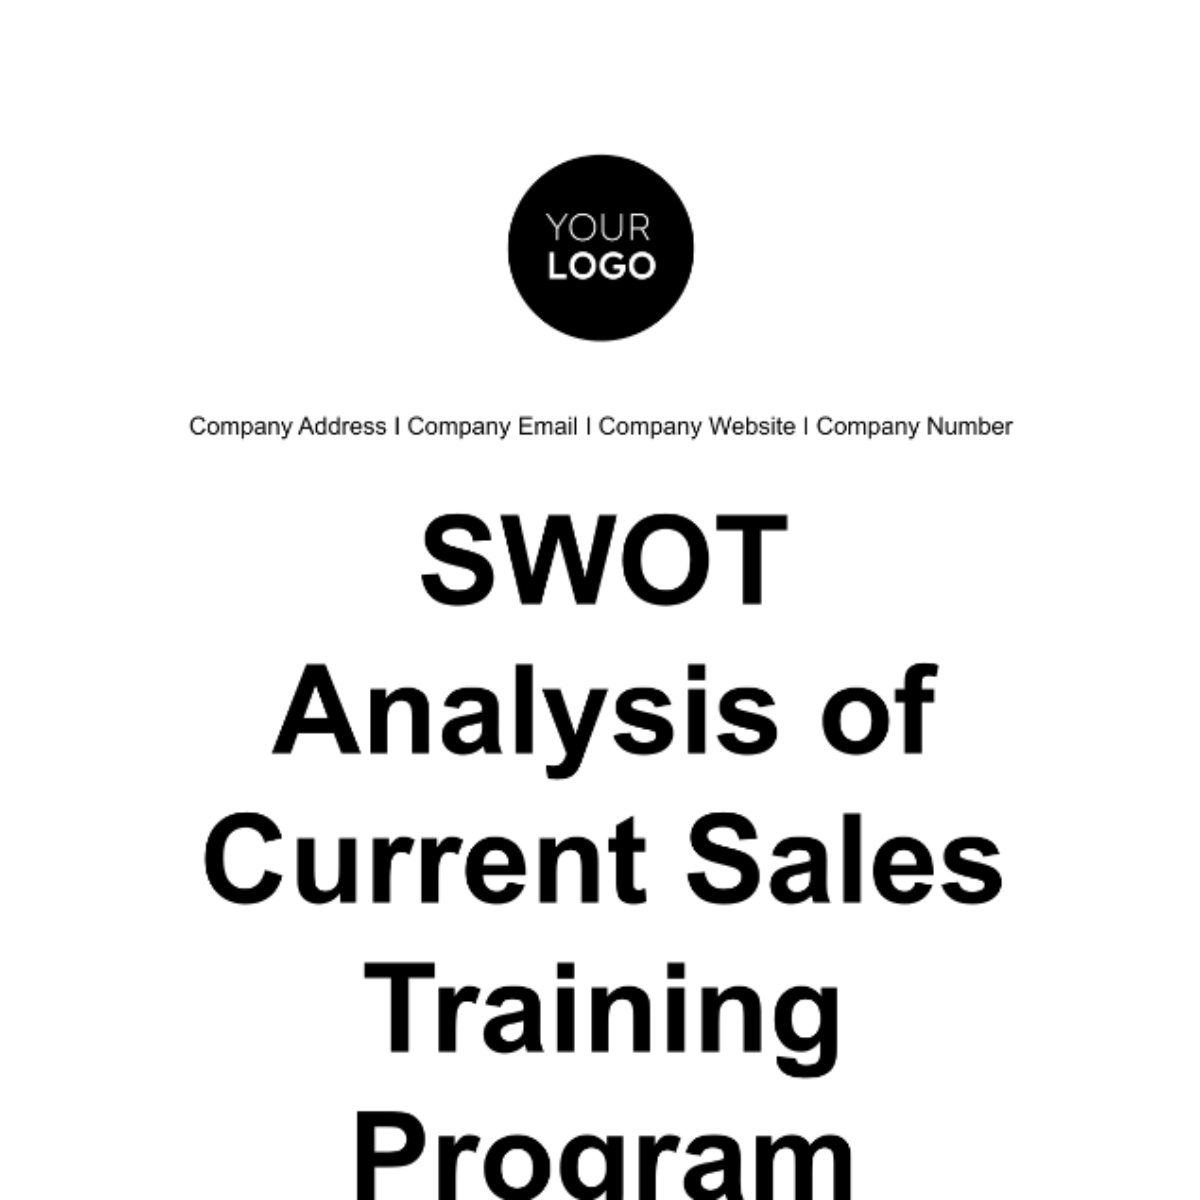 Free SWOT Analysis of Current Sales Training Program Template